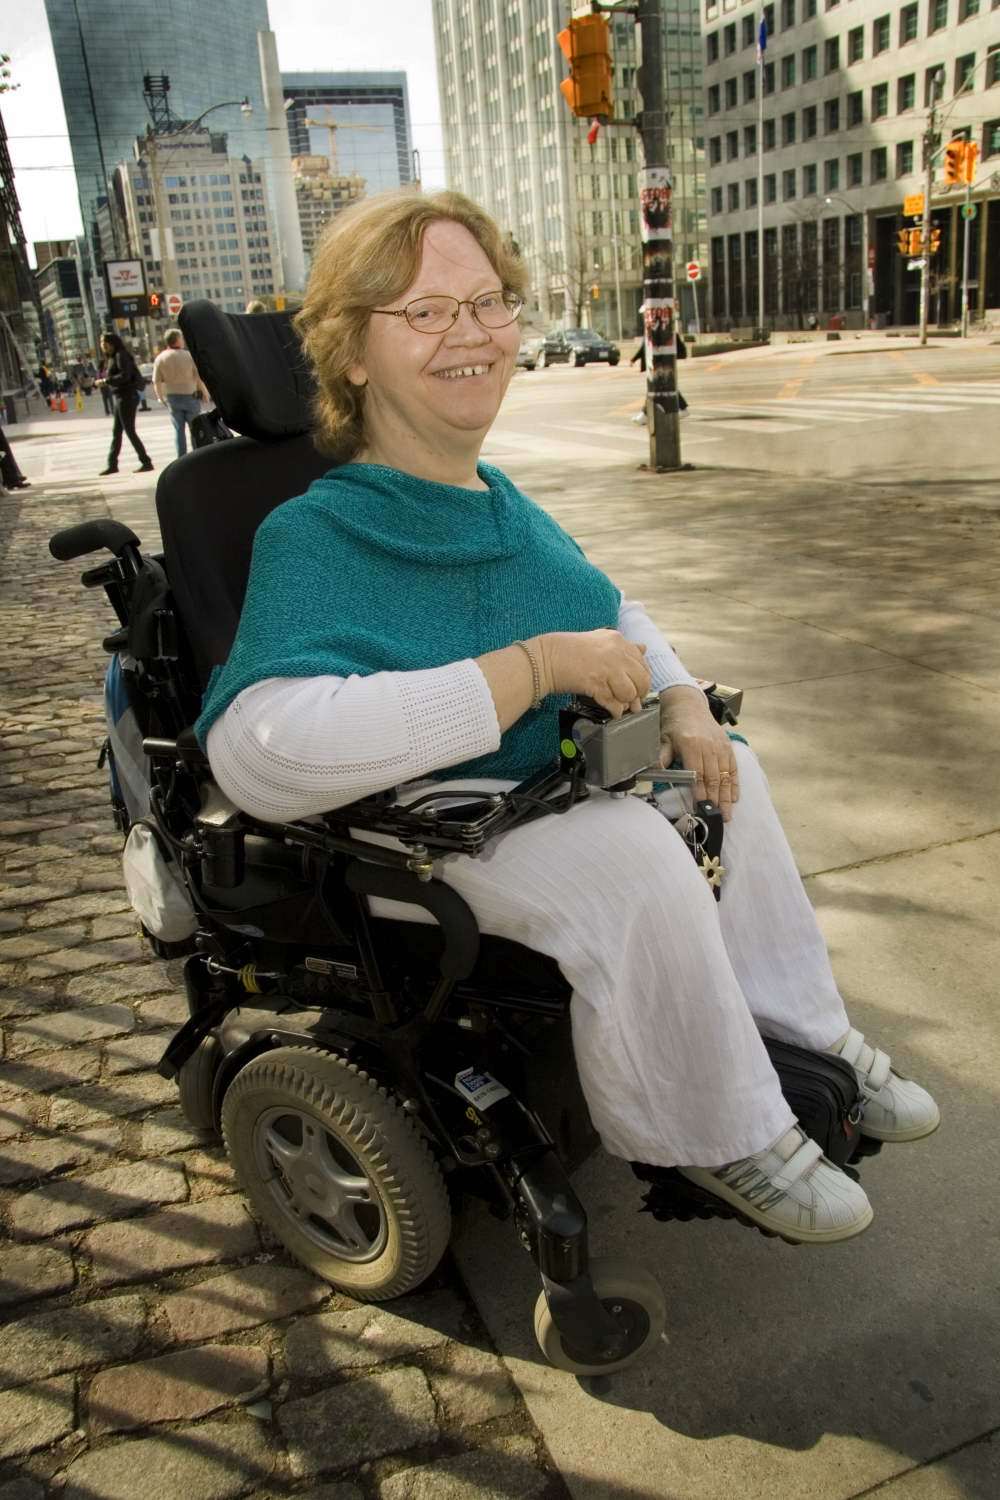 Born in Ottawa, but Toronto is now home. Mom, wife, grandma.  Want to see Toronto's buildings, transit & services more accessible to people with disabilities.